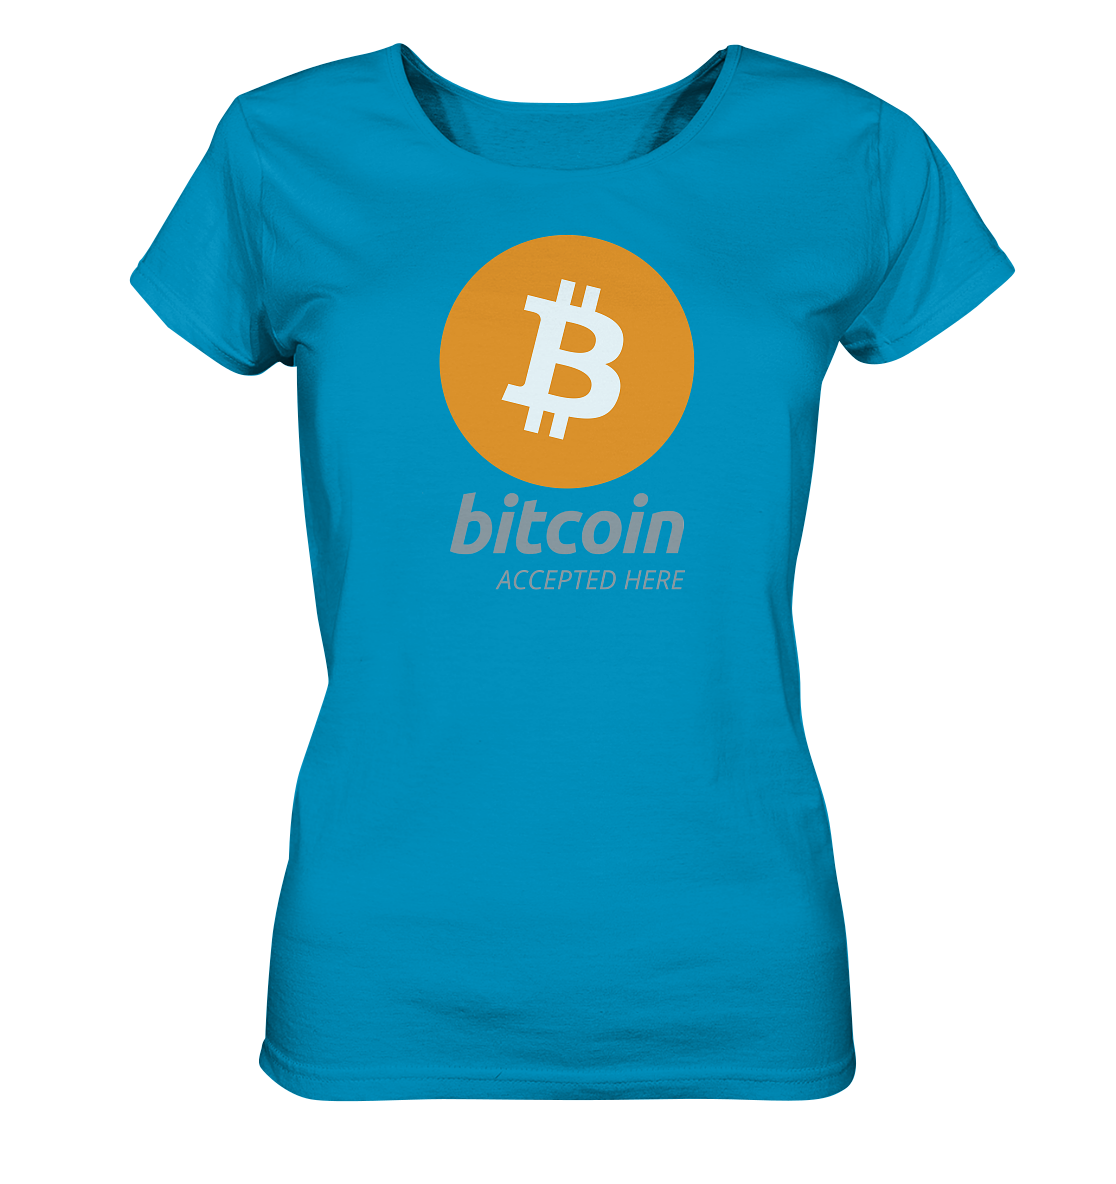 Bitcoin accepted here - Ladies Organic Shirt